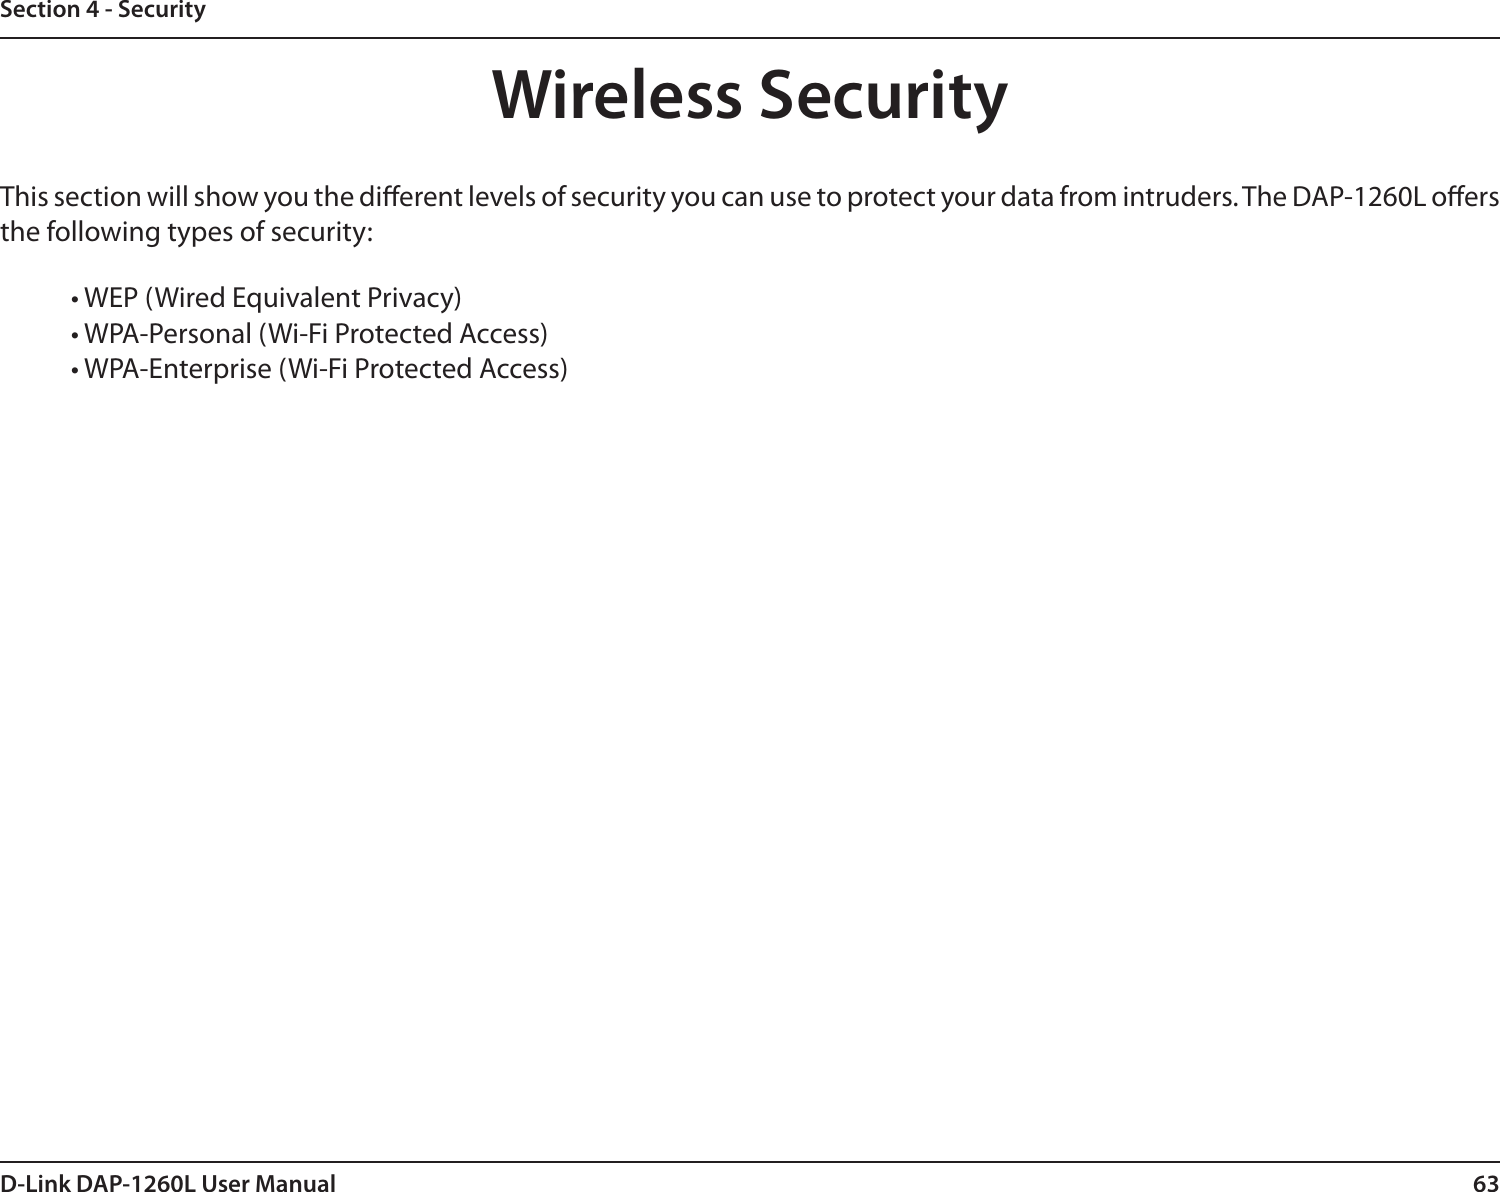 63D-Link DAP-1260L User ManualSection 4 - SecurityWireless SecurityThis section will show you the dierent levels of security you can use to protect your data from intruders. The DAP-1260L oers the following types of security:• WEP (Wired Equivalent Privacy) • WPA-Personal (Wi-Fi Protected Access) • WPA-Enterprise (Wi-Fi Protected Access) 